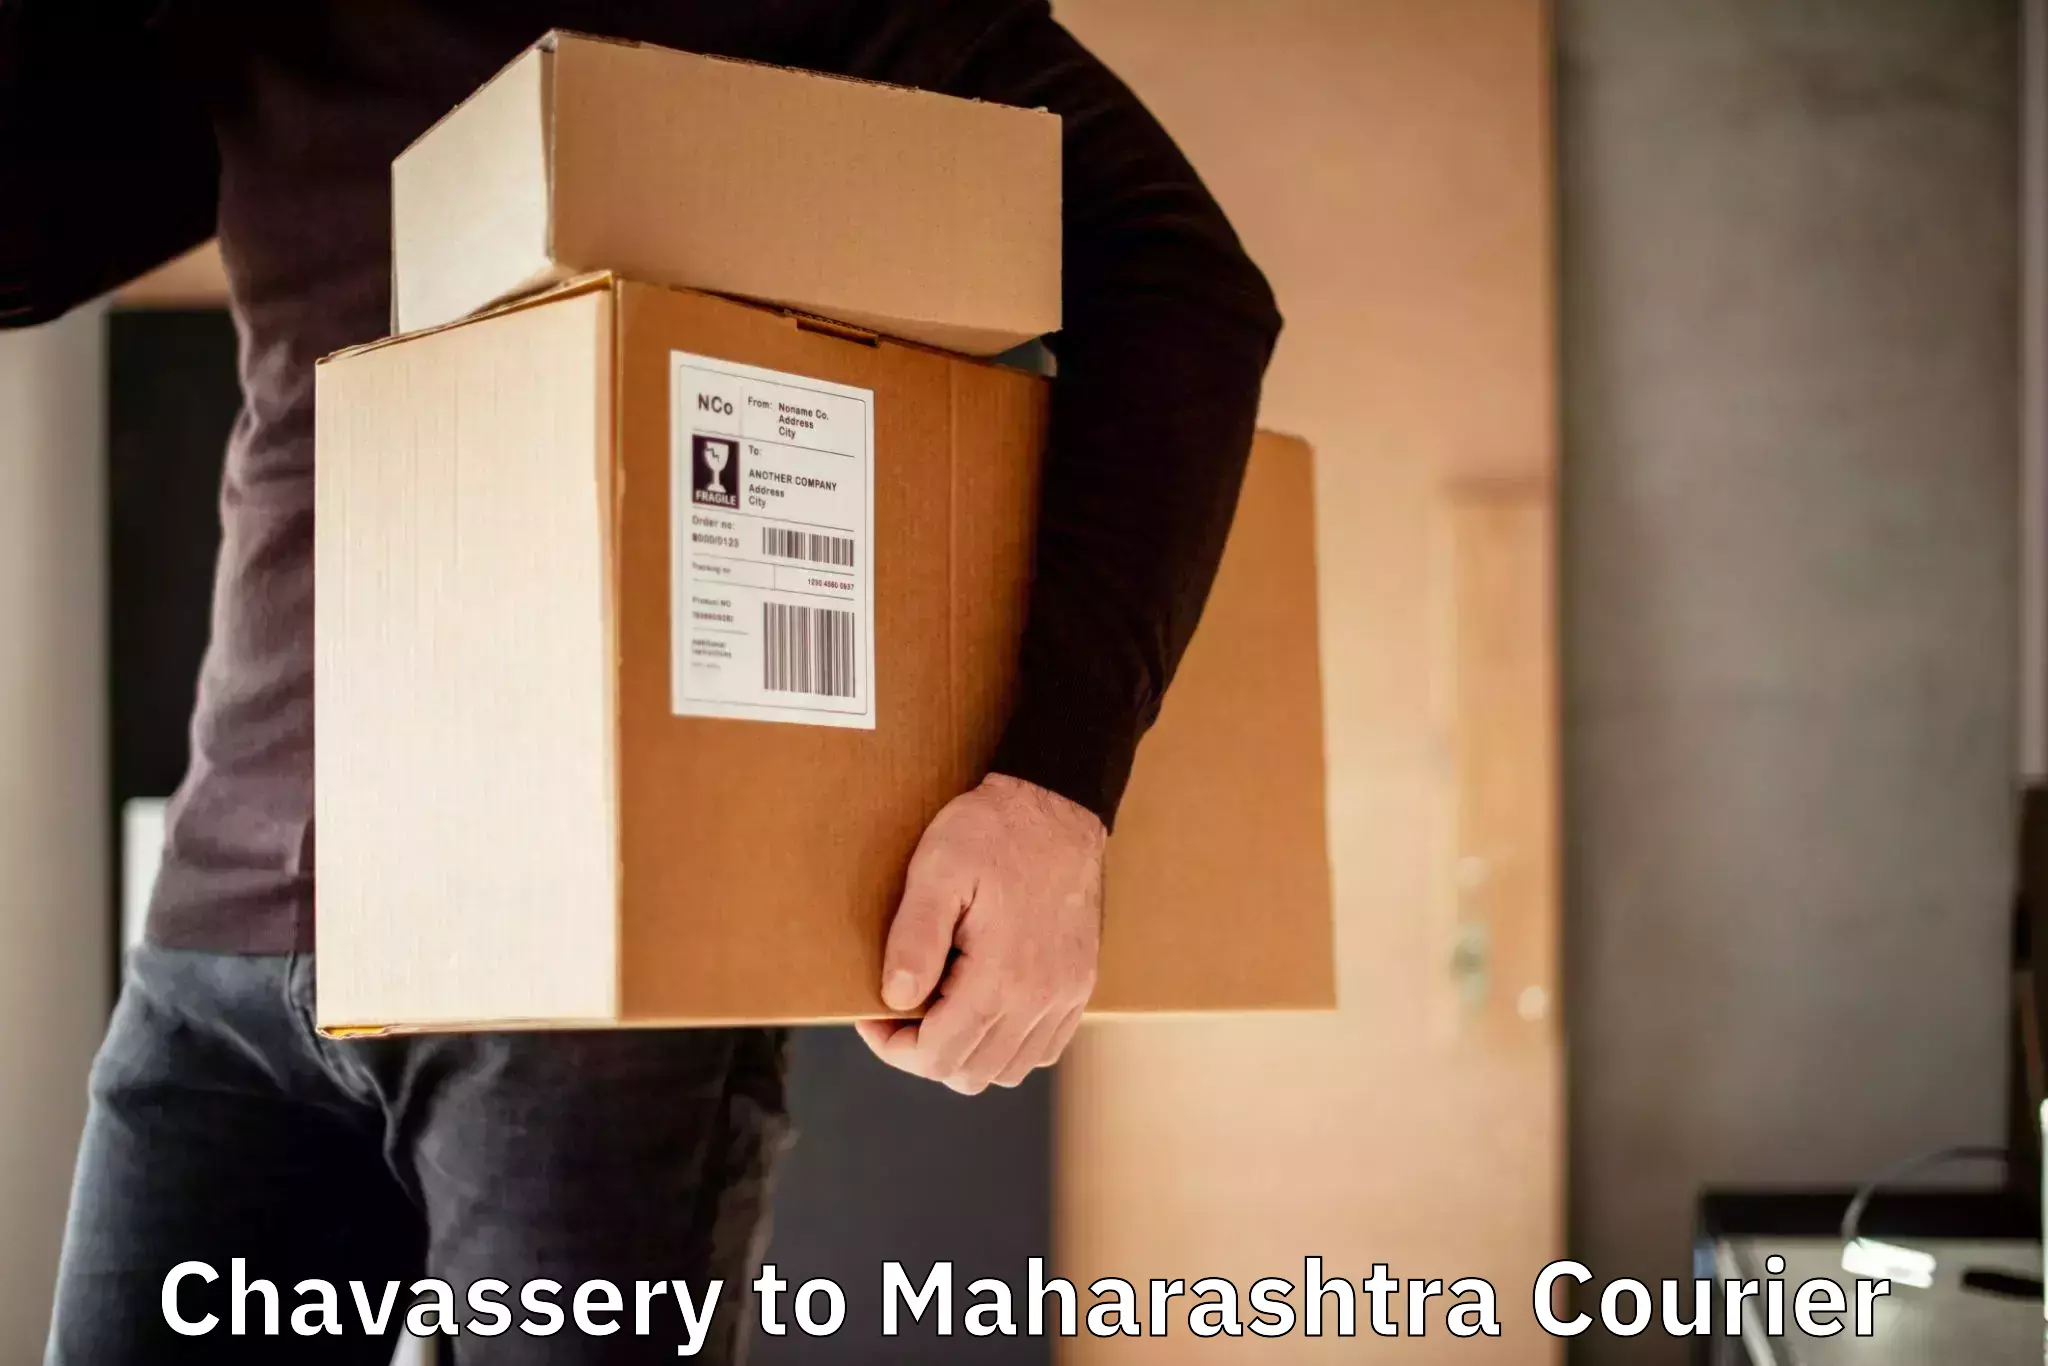 Flexible delivery schedules Chavassery to Mahim